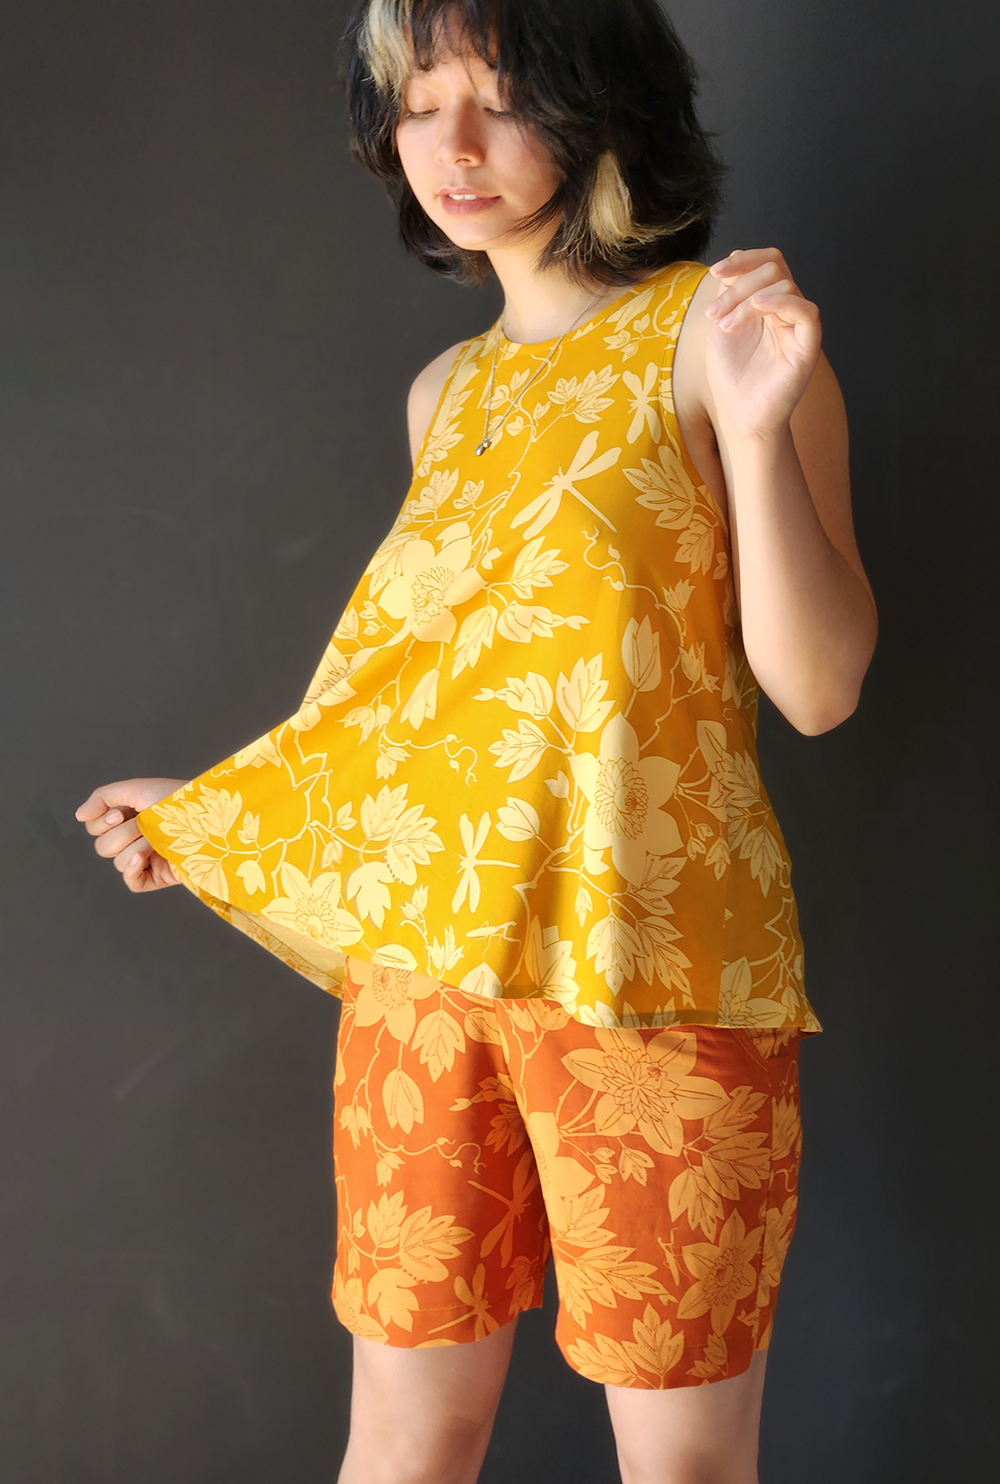 Swing Top Passion Flower turmeric 2 sizes - SALE CLOTHING & KIDS